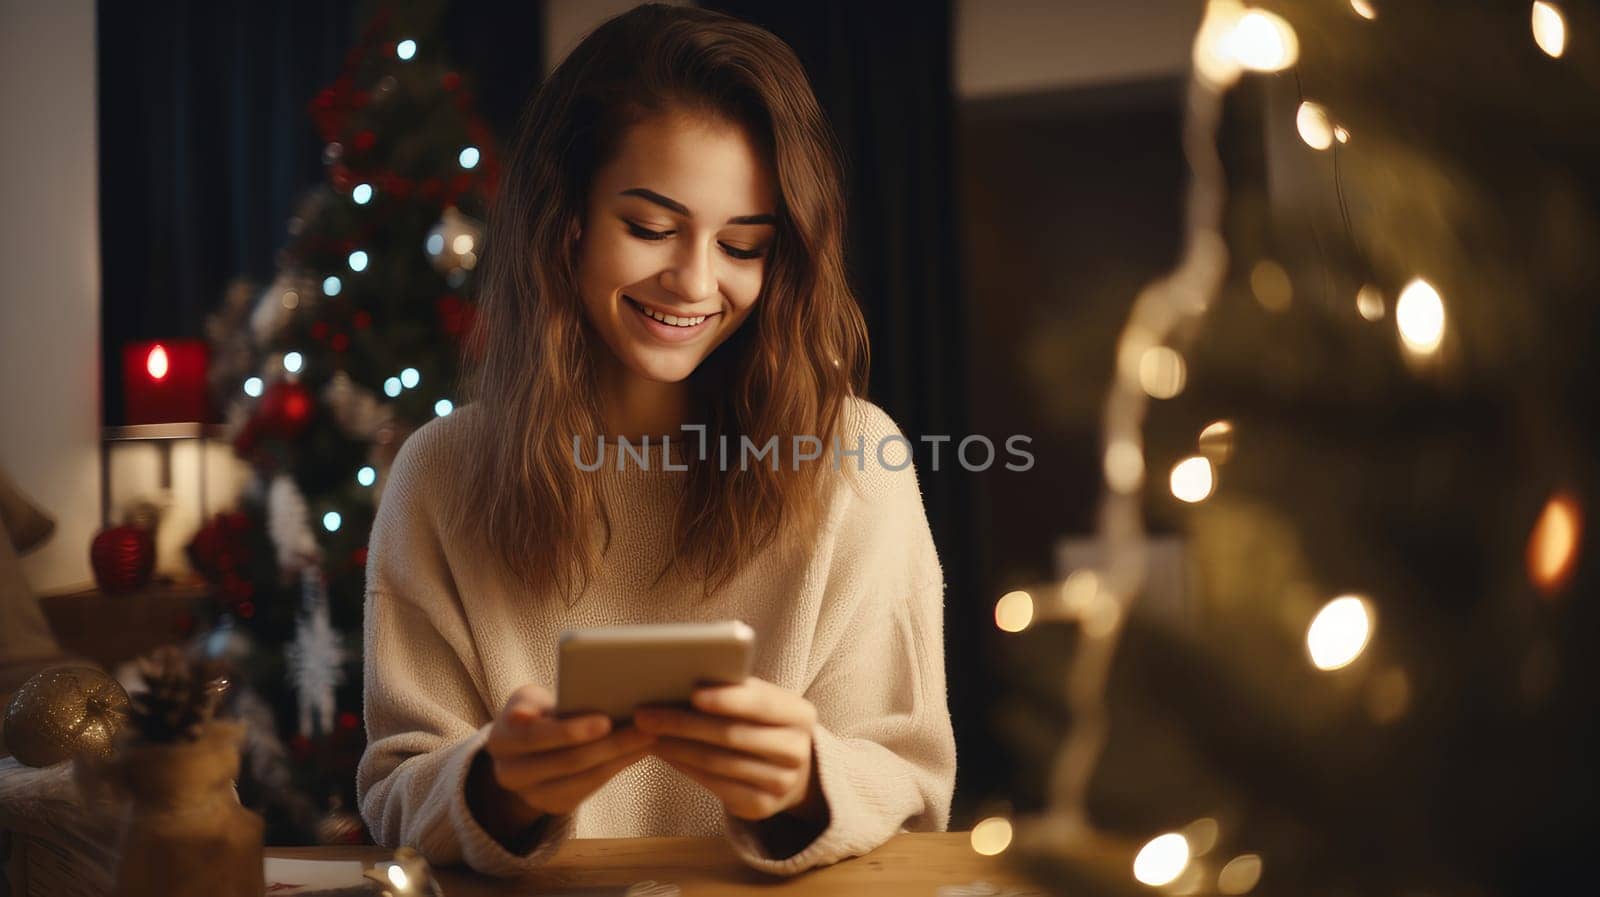 Pretty smiling girl holding Christmas gifts while standing against background of decorated Christmas tree outdoors wearing yellow outerwear on snowy winter holiday day by Alla_Yurtayeva